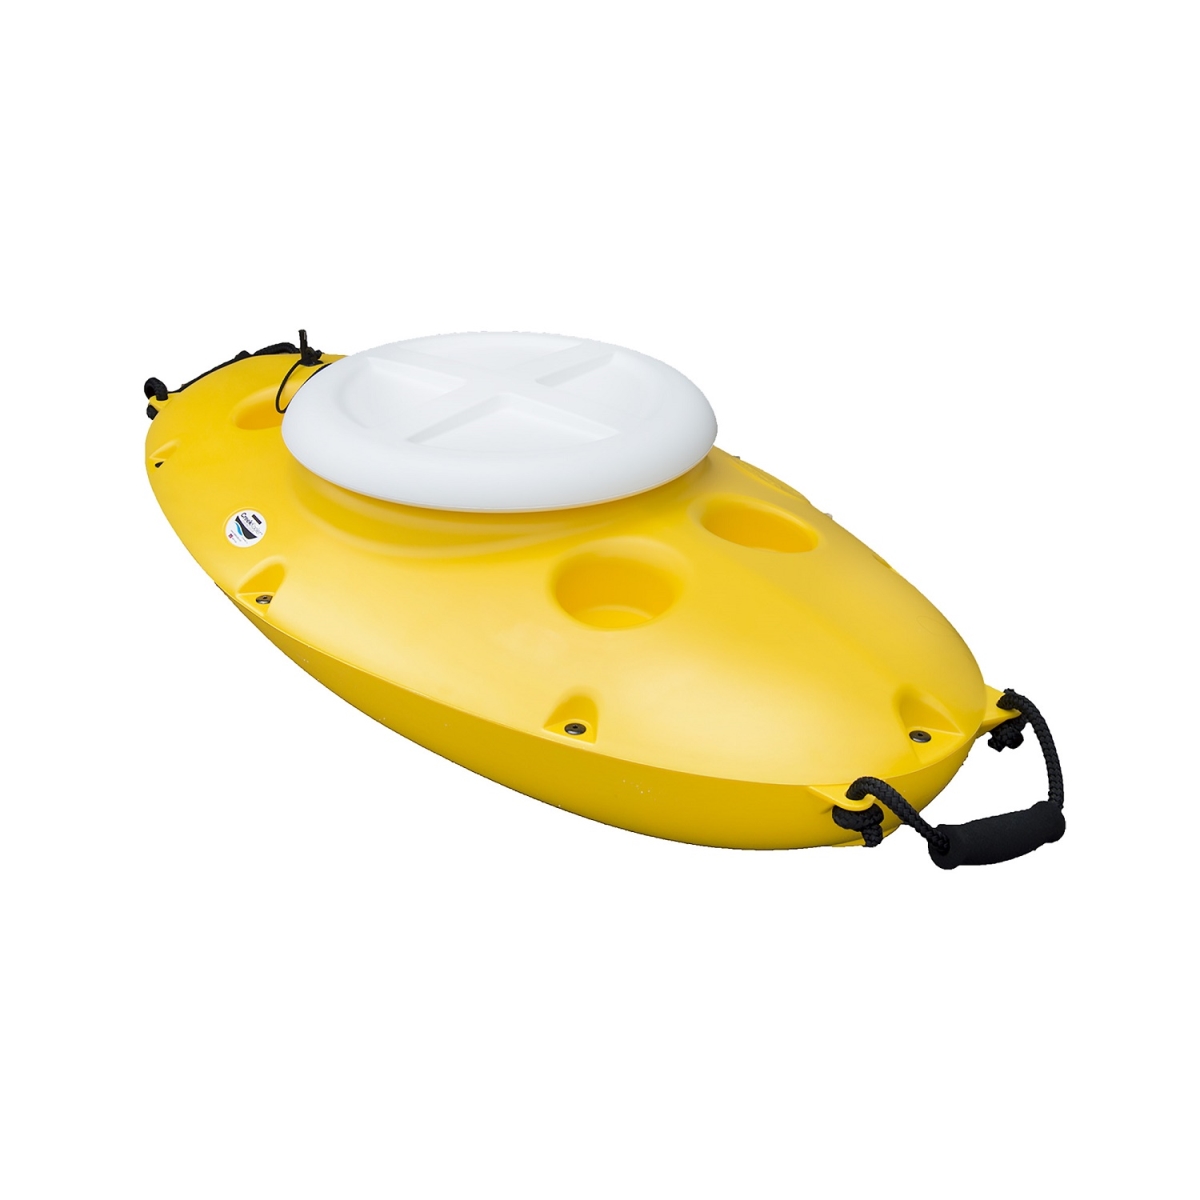 2160899 30 Qt Floating Cooler Storage Camping, Yellow